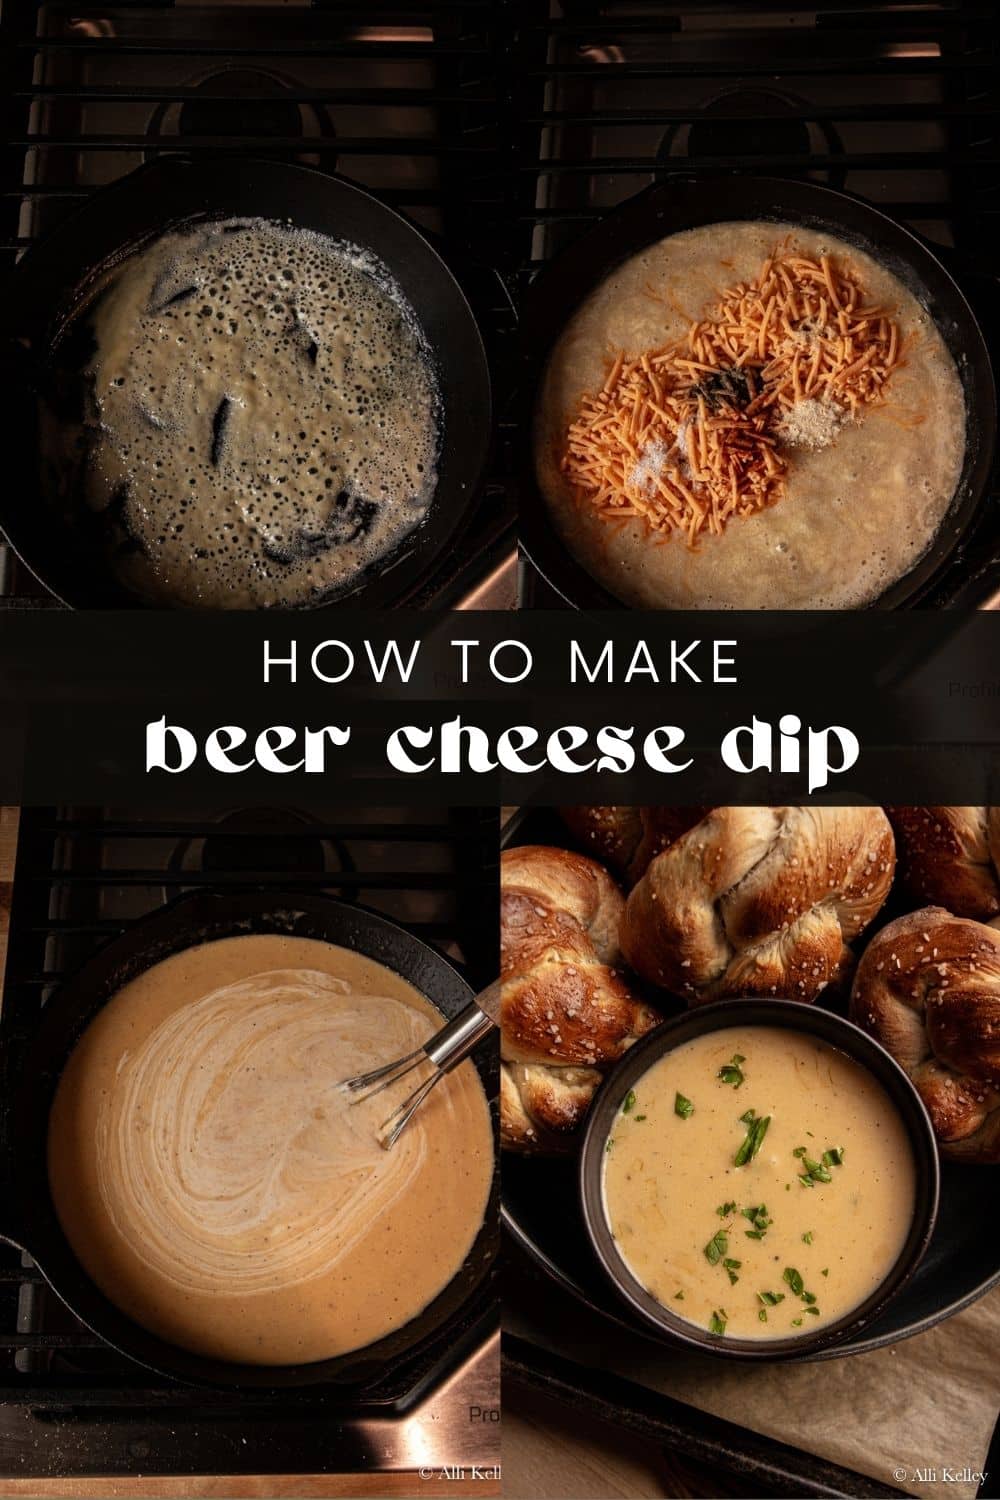 This beer cheese sauce recipe is a guaranteed crowd-pleaser! With the combination of beer and cheese, you'll get an amazing cheesy dip with a delicious hint of hops in every bite. Serve it up as an appetizer for your next dinner party or game day celebration, and you'll have a winning snack everyone will love!